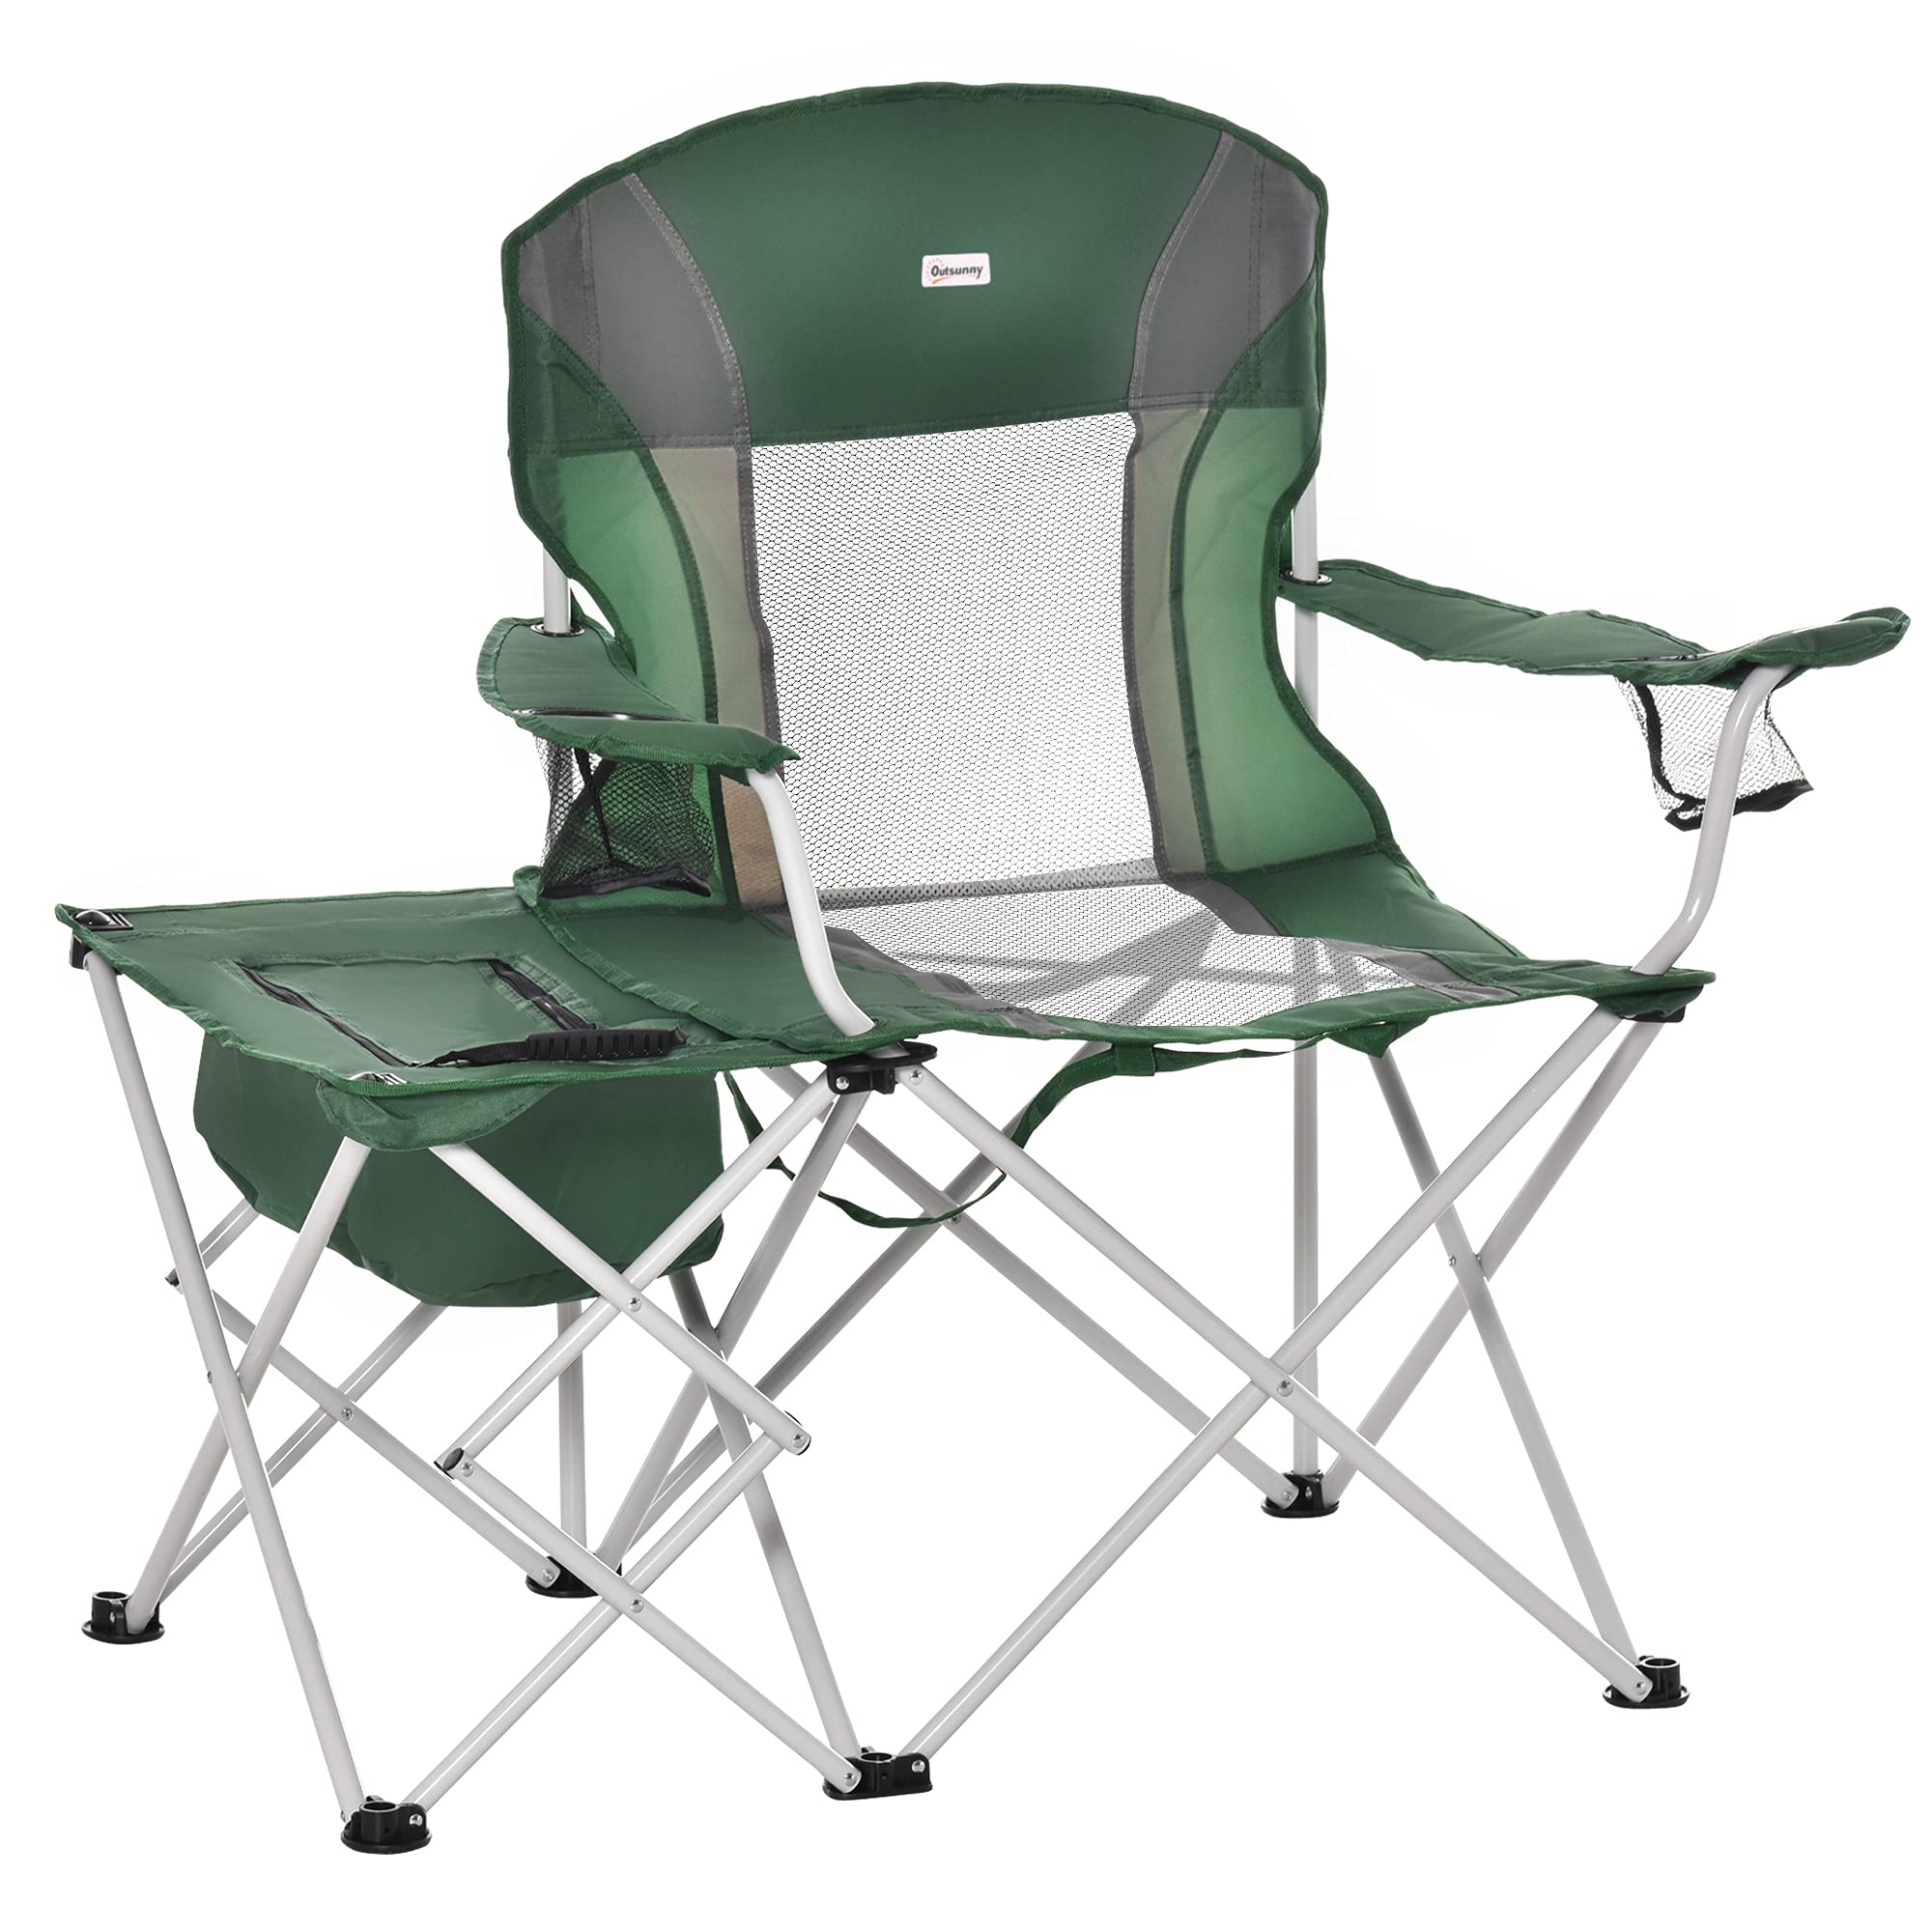 Outsunny Folding Camping Chair with Portable Insulation Table Bag Two Cup Holders for Beach Ice Fishing and Picnic Green